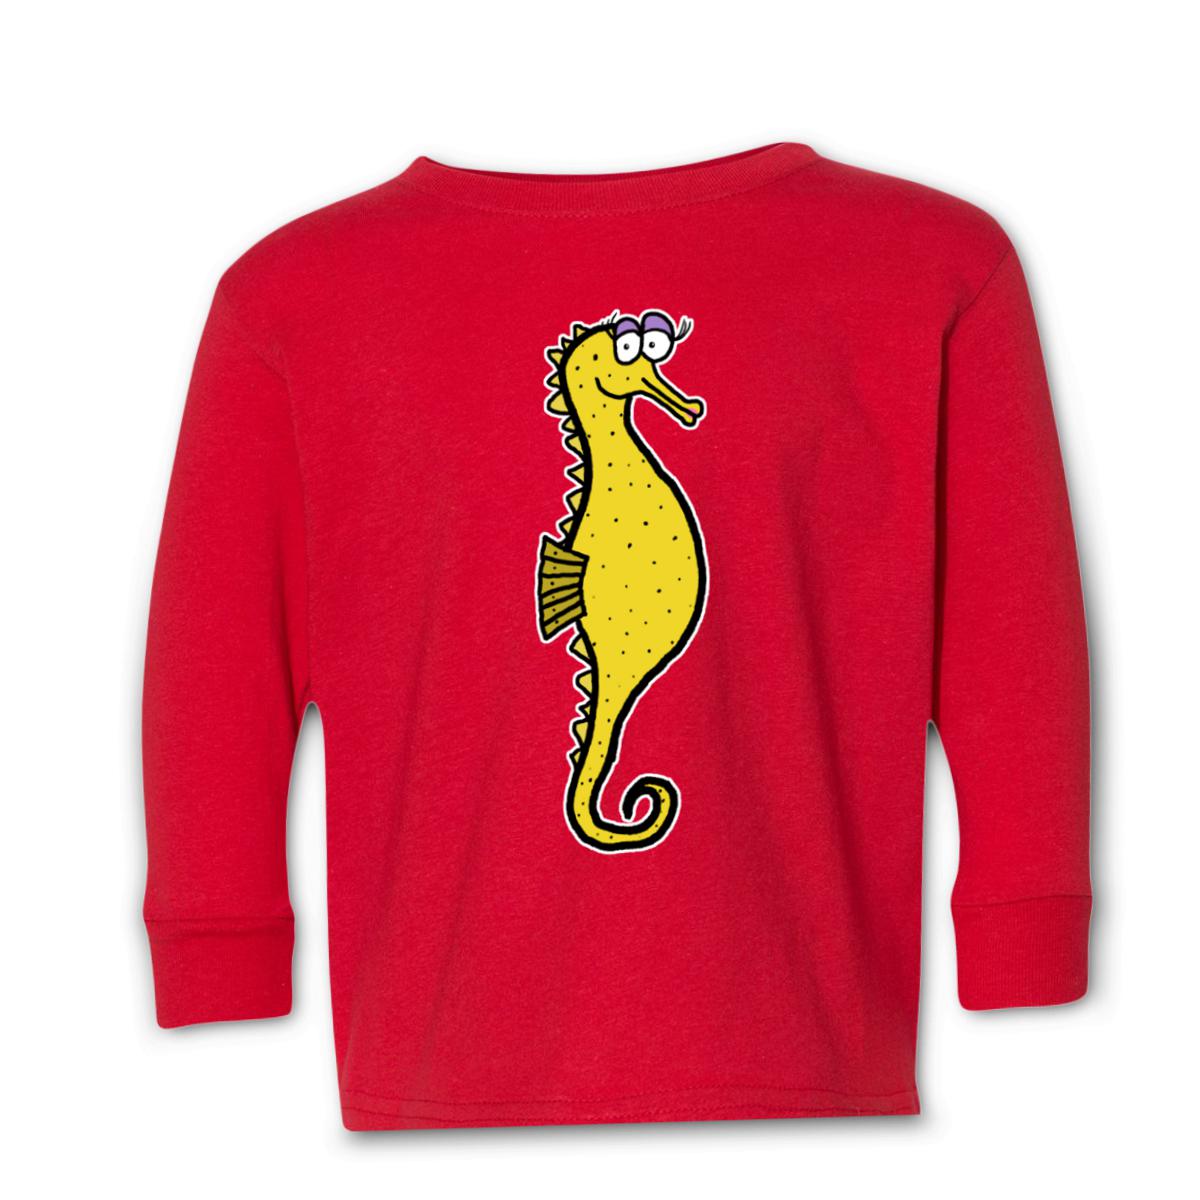 Seahorse Kid's Long Sleeve Tee Small red